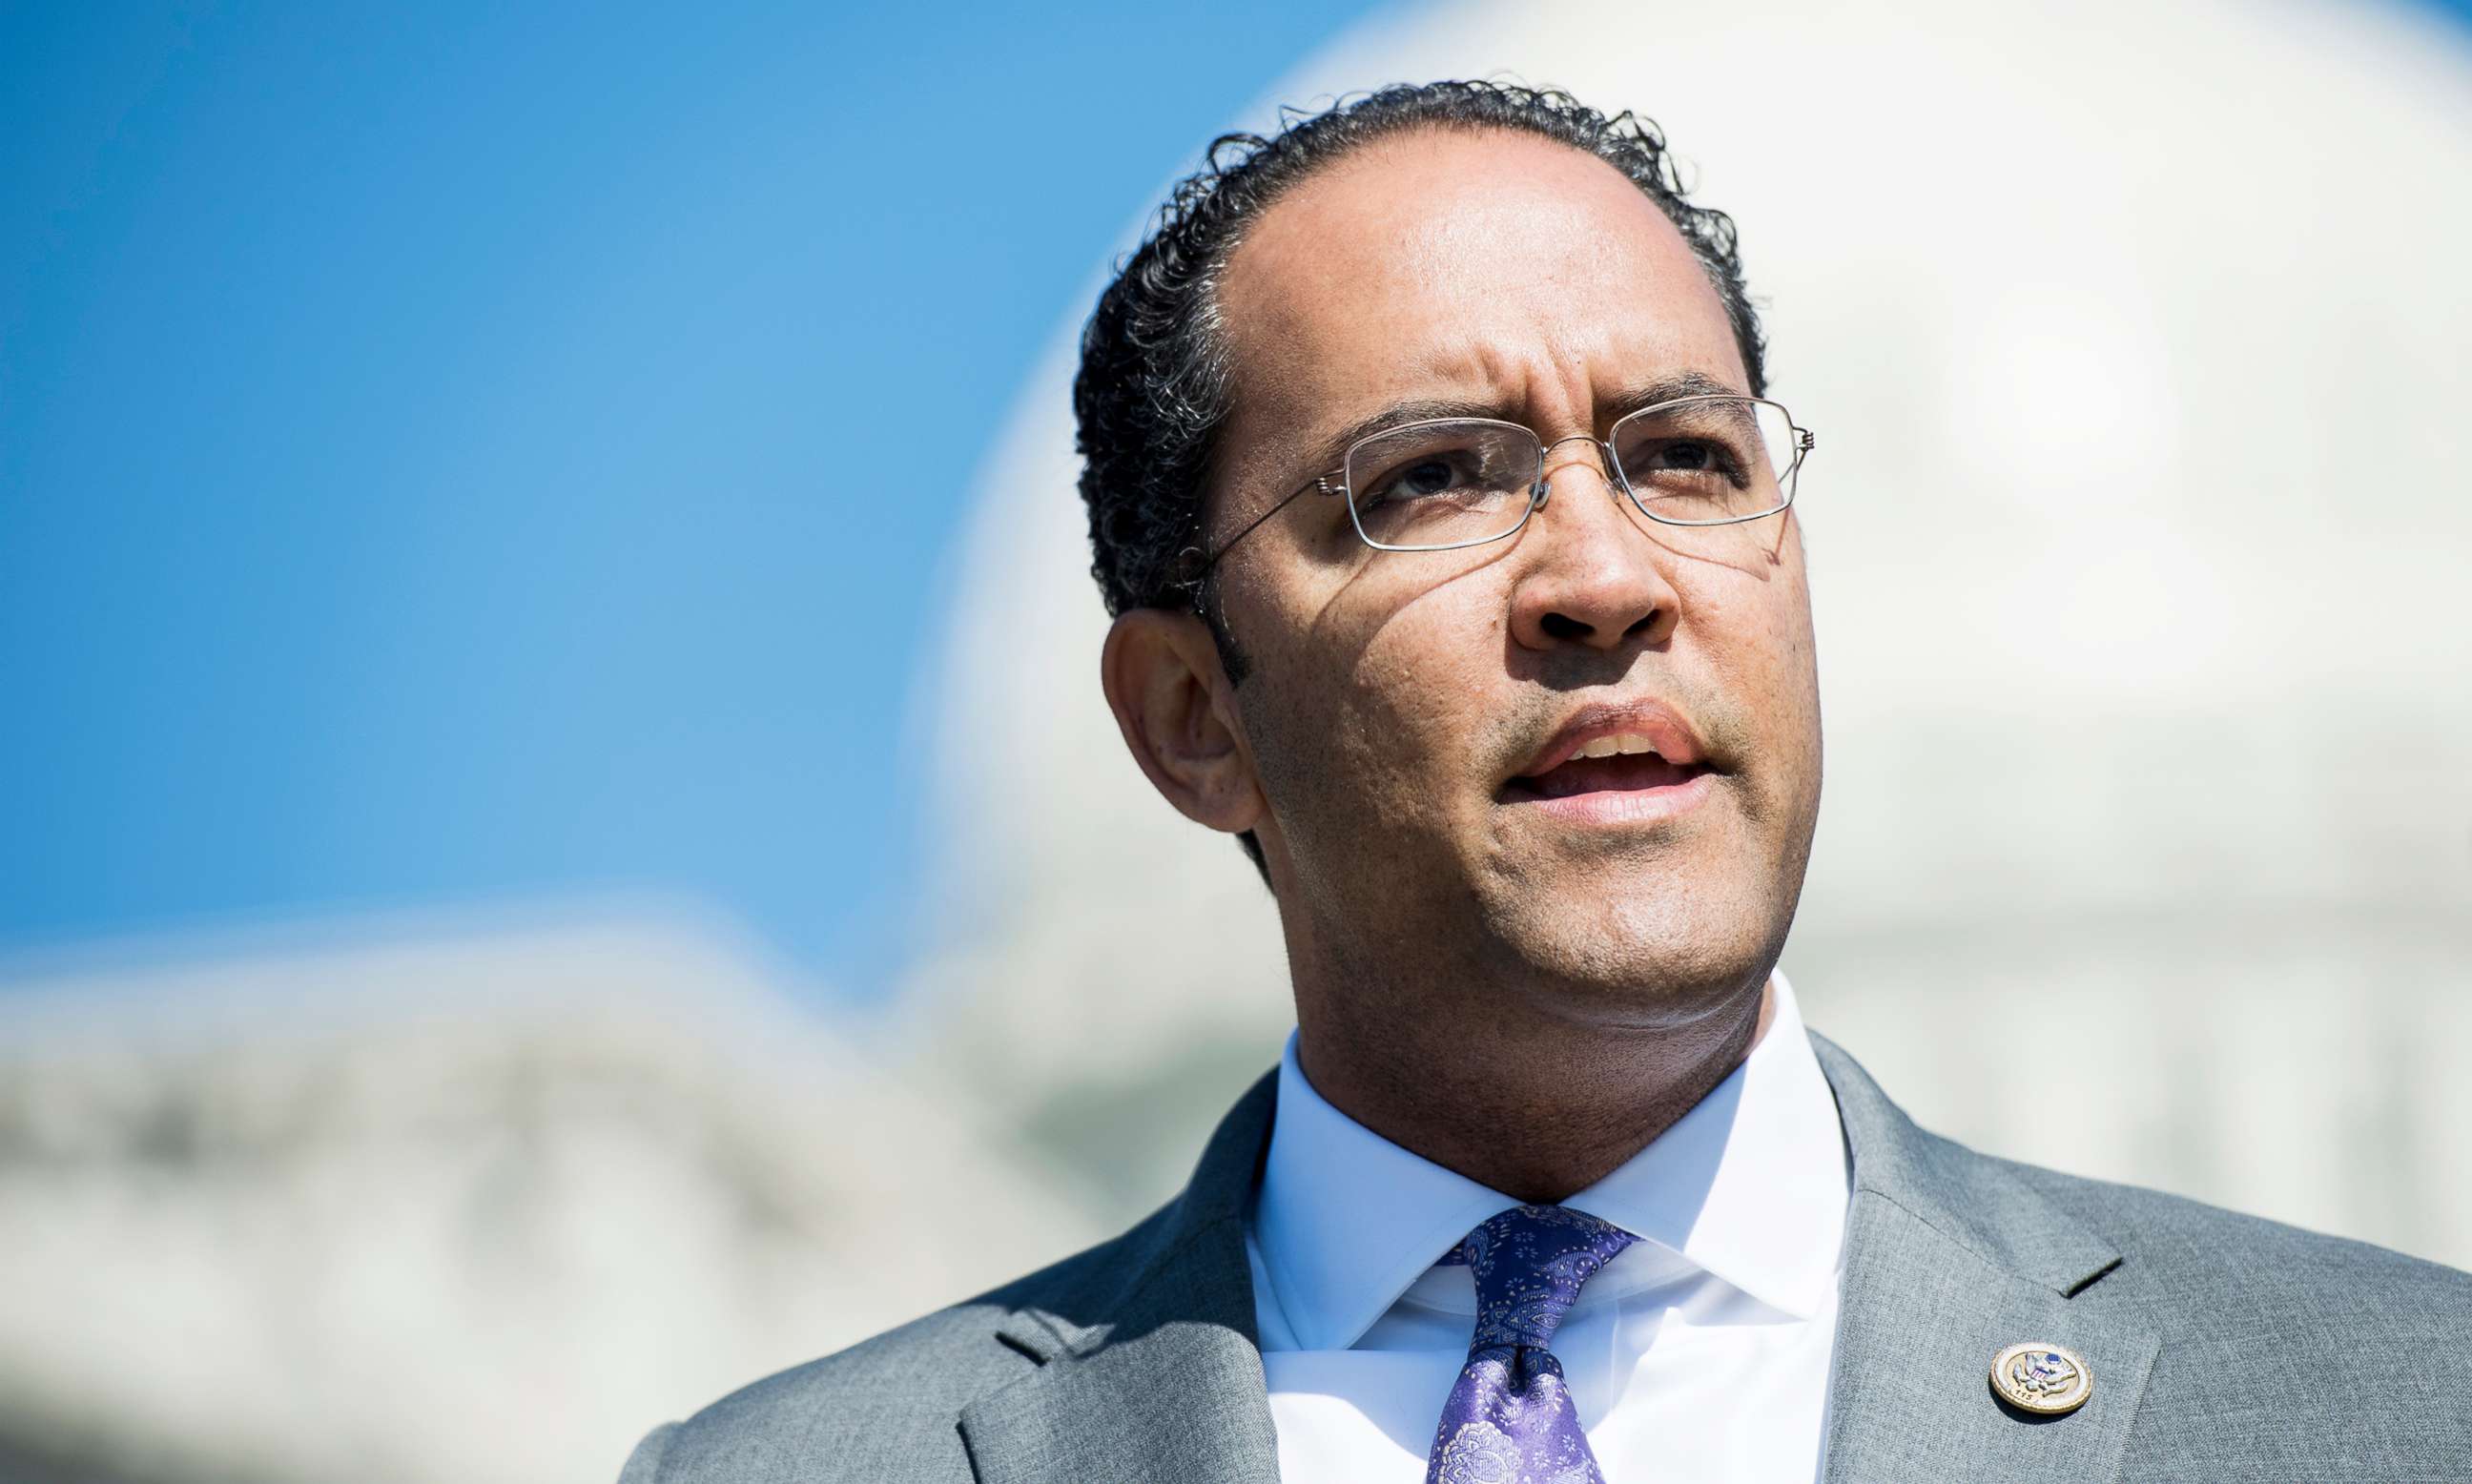 PHOTO: Rep. Will Hurd speaks during a news conference in Washington D.C., April 18, 2018.